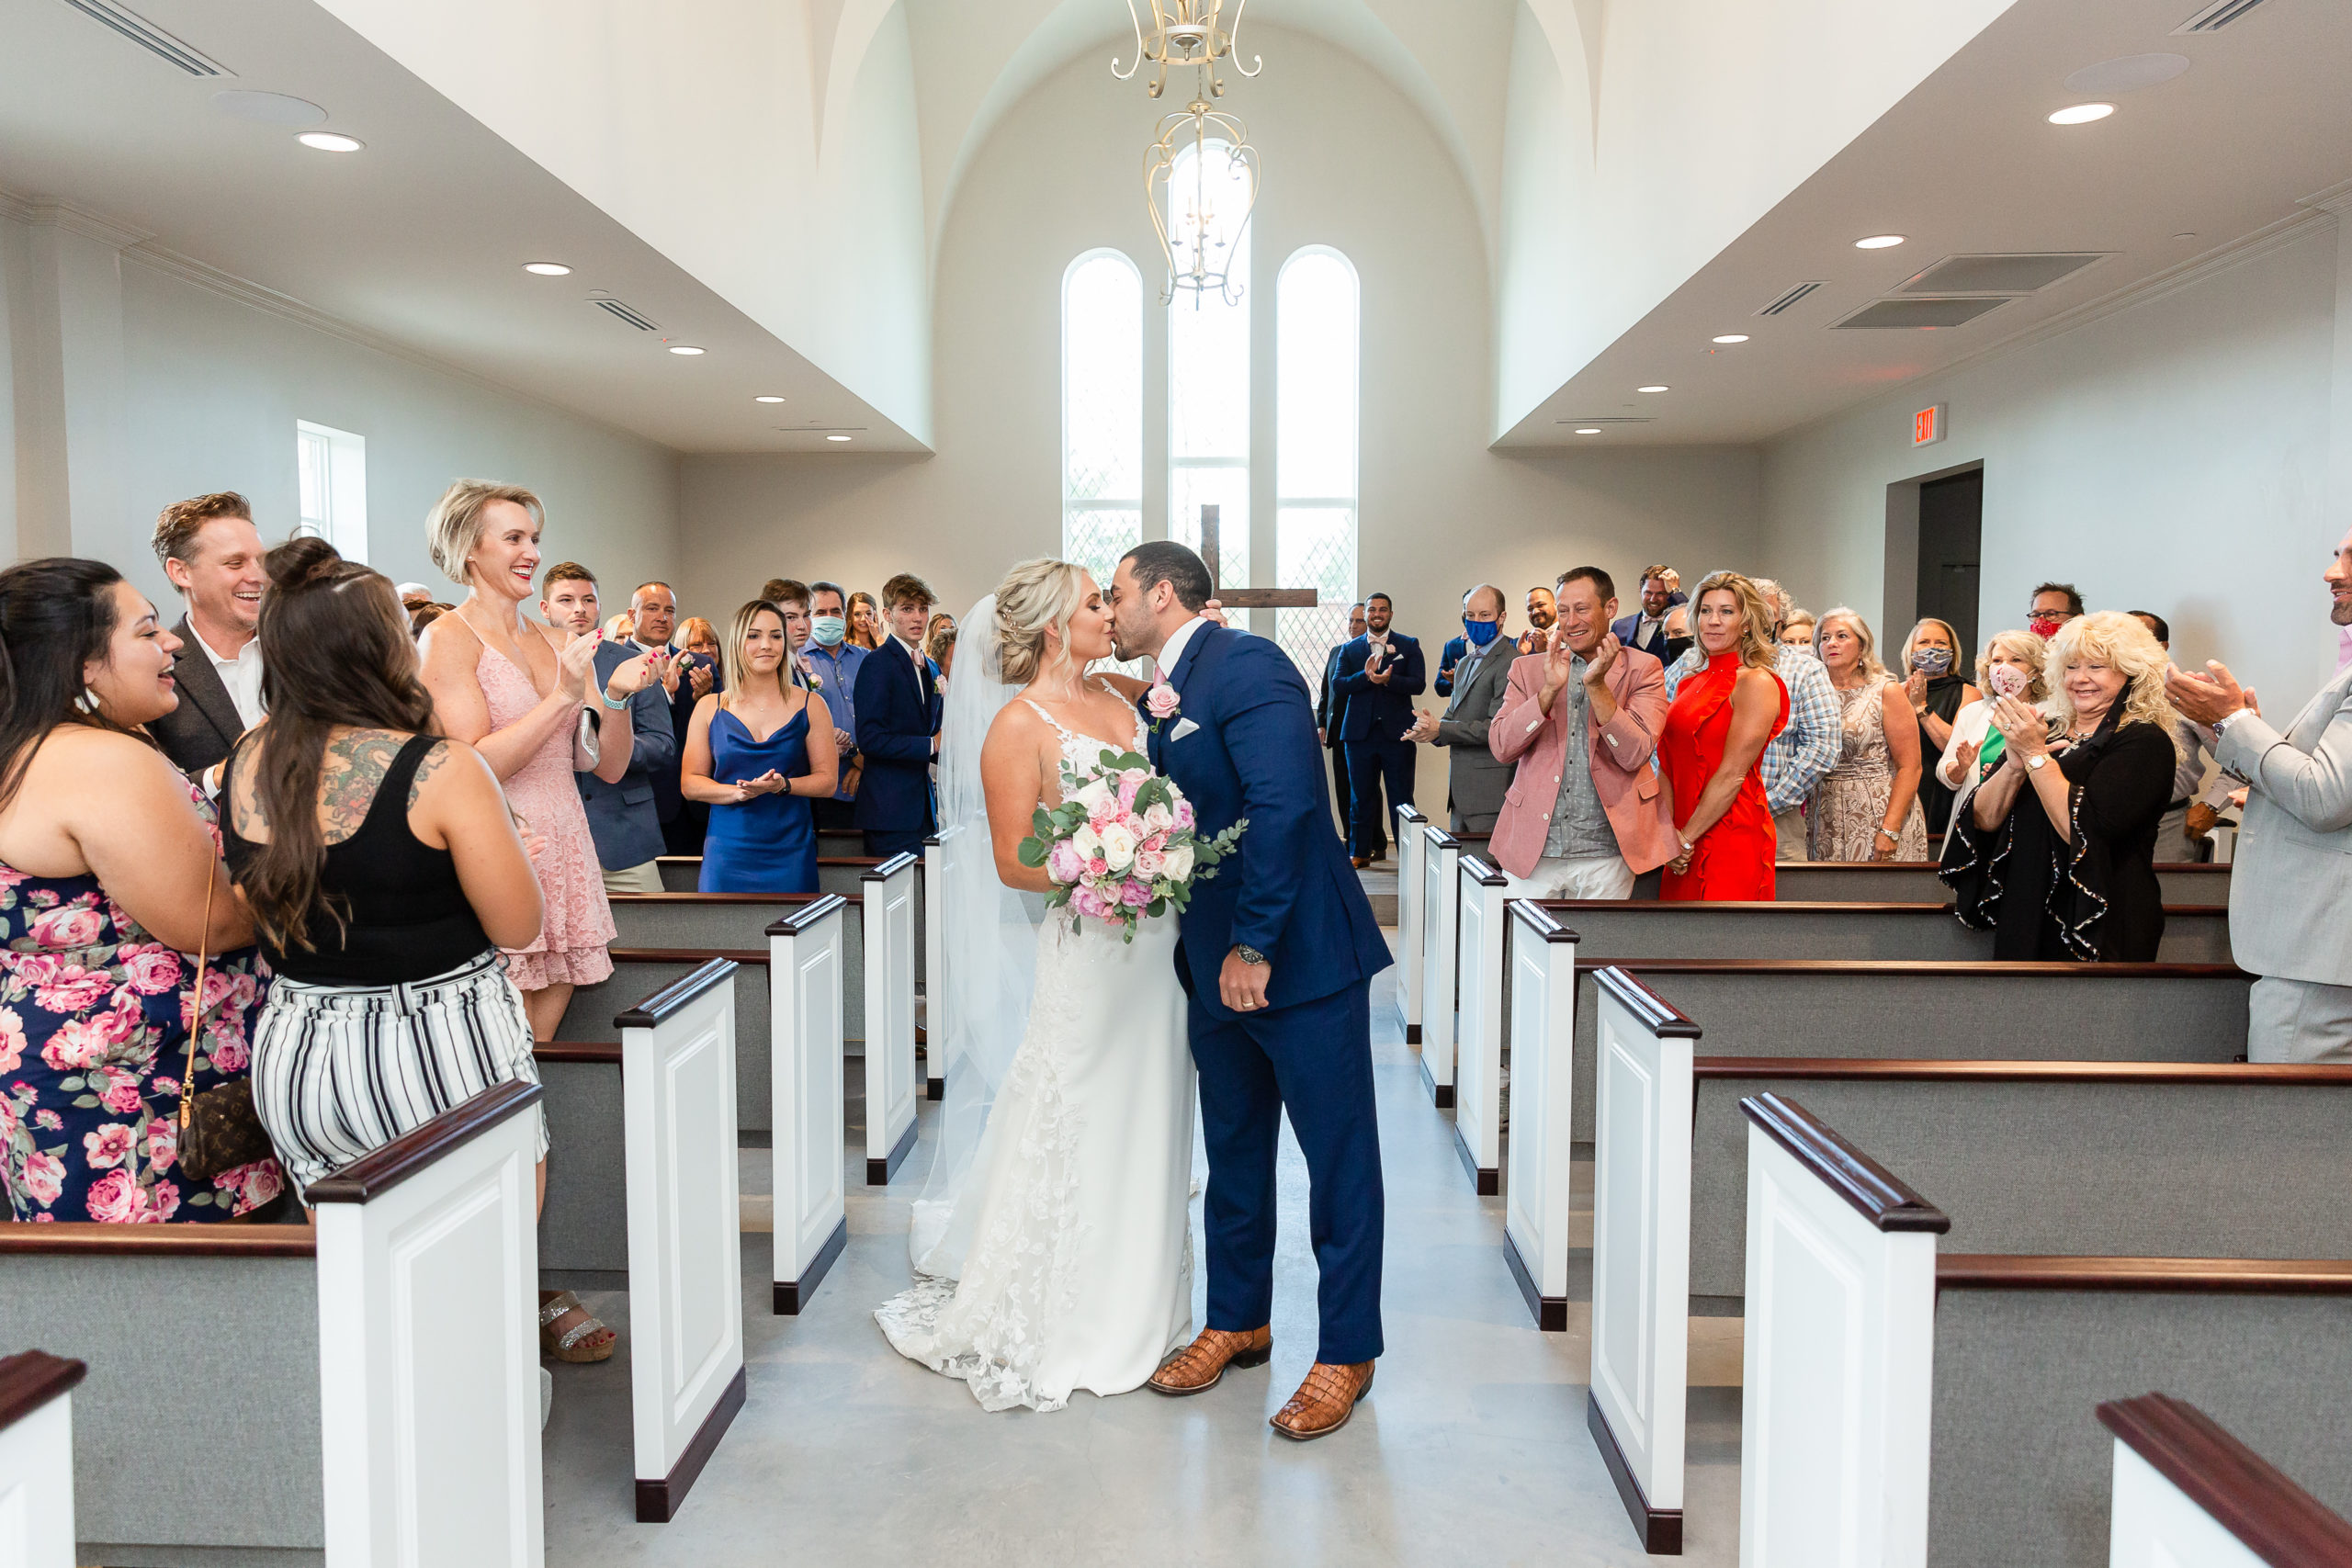 Dallas wedding photographer captures wedding ceremony exit with bride and groom walking down the aisle and kissing while their guest stand and cheer for them